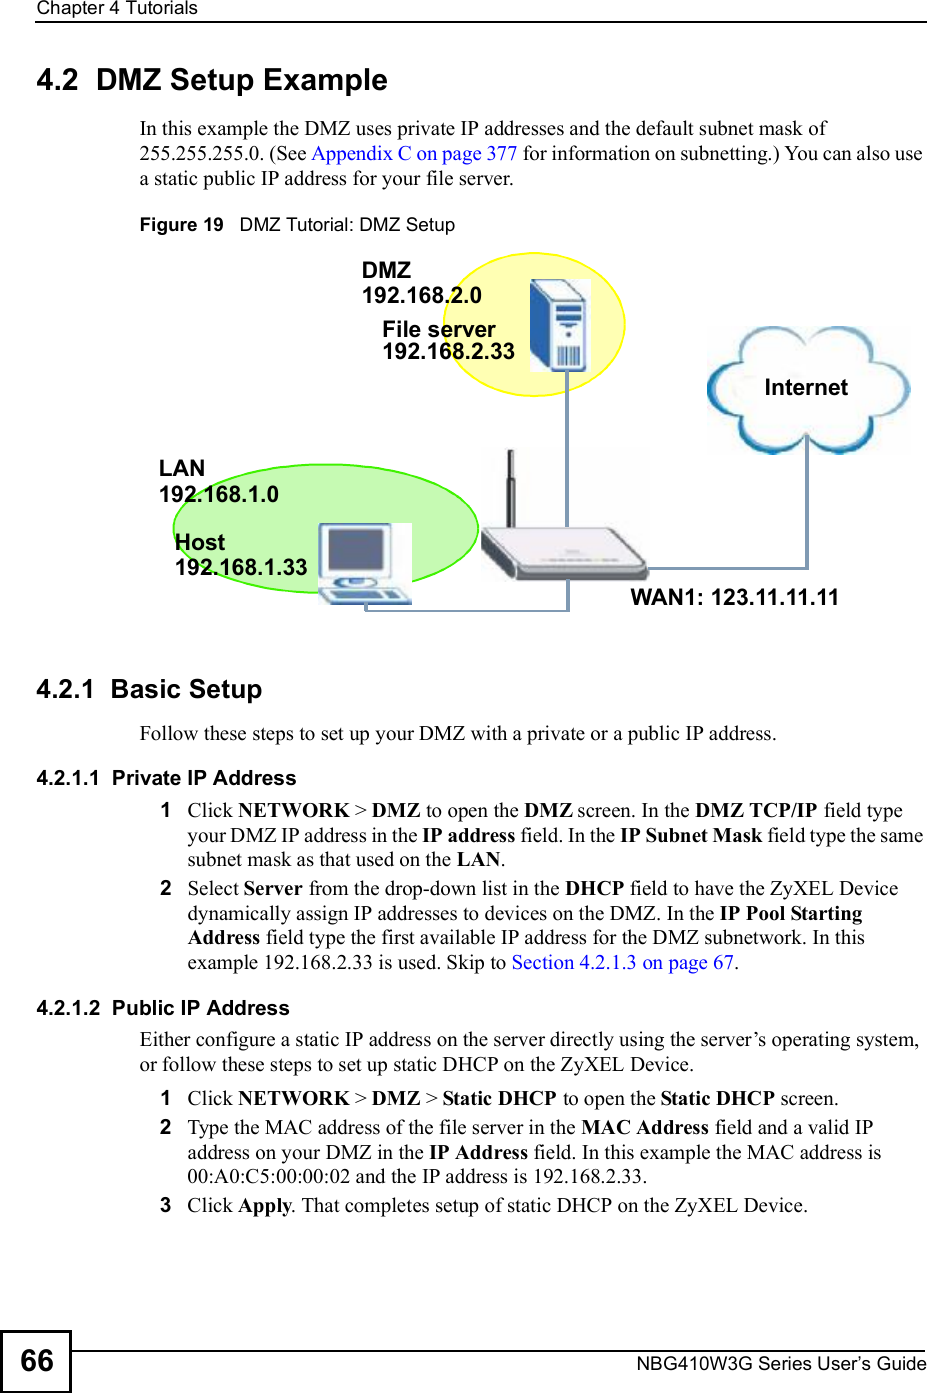 Chapter 4TutorialsNBG410W3G Series User s Guide664.2  DMZ Setup Example In this example the DMZ uses private IP addresses and the default subnet mask of 255.255.255.0. (See Appendix C on page 377 for information on subnetting.) You can also use a static public IP address for your file server. Figure 19   DMZ Tutorial: DMZ Setup4.2.1  Basic SetupFollow these steps to set up your DMZ with a private or a public IP address. 4.2.1.1  Private IP Address1Click NETWORK &gt; DMZ to open the DMZ screen. In the DMZ TCP/IP field type your DMZ IP address in the IP address field. In the IP Subnet Mask field type the same subnet mask as that used on the LAN. 2Select Server from the drop-down list in the DHCP field to have the ZyXEL Device dynamically assign IP addresses to devices on the DMZ. In the IP Pool Starting Address field type the first available IP address for the DMZ subnetwork. In this example 192.168.2.33 is used. Skip to Section 4.2.1.3 on page 67.4.2.1.2  Public IP AddressEither configure a static IP address on the server directly using the server!s operating system, or follow these steps to set up static DHCP on the ZyXEL Device. 1Click NETWORK &gt; DMZ &gt; Static DHCP to open the Static DHCP screen. 2Type the MAC address of the file server in the MAC Address field and a valid IP address on your DMZ in the IP Address field. In this example the MAC address is 00:A0:C5:00:00:02 and the IP address is 192.168.2.33.3Click Apply. That completes setup of static DHCP on the ZyXEL Device.InternetFile serverWAN1: 123.11.11.11DMZ LAN192.168.2.33192.168.2.0192.168.1.0192.168.1.33Host 